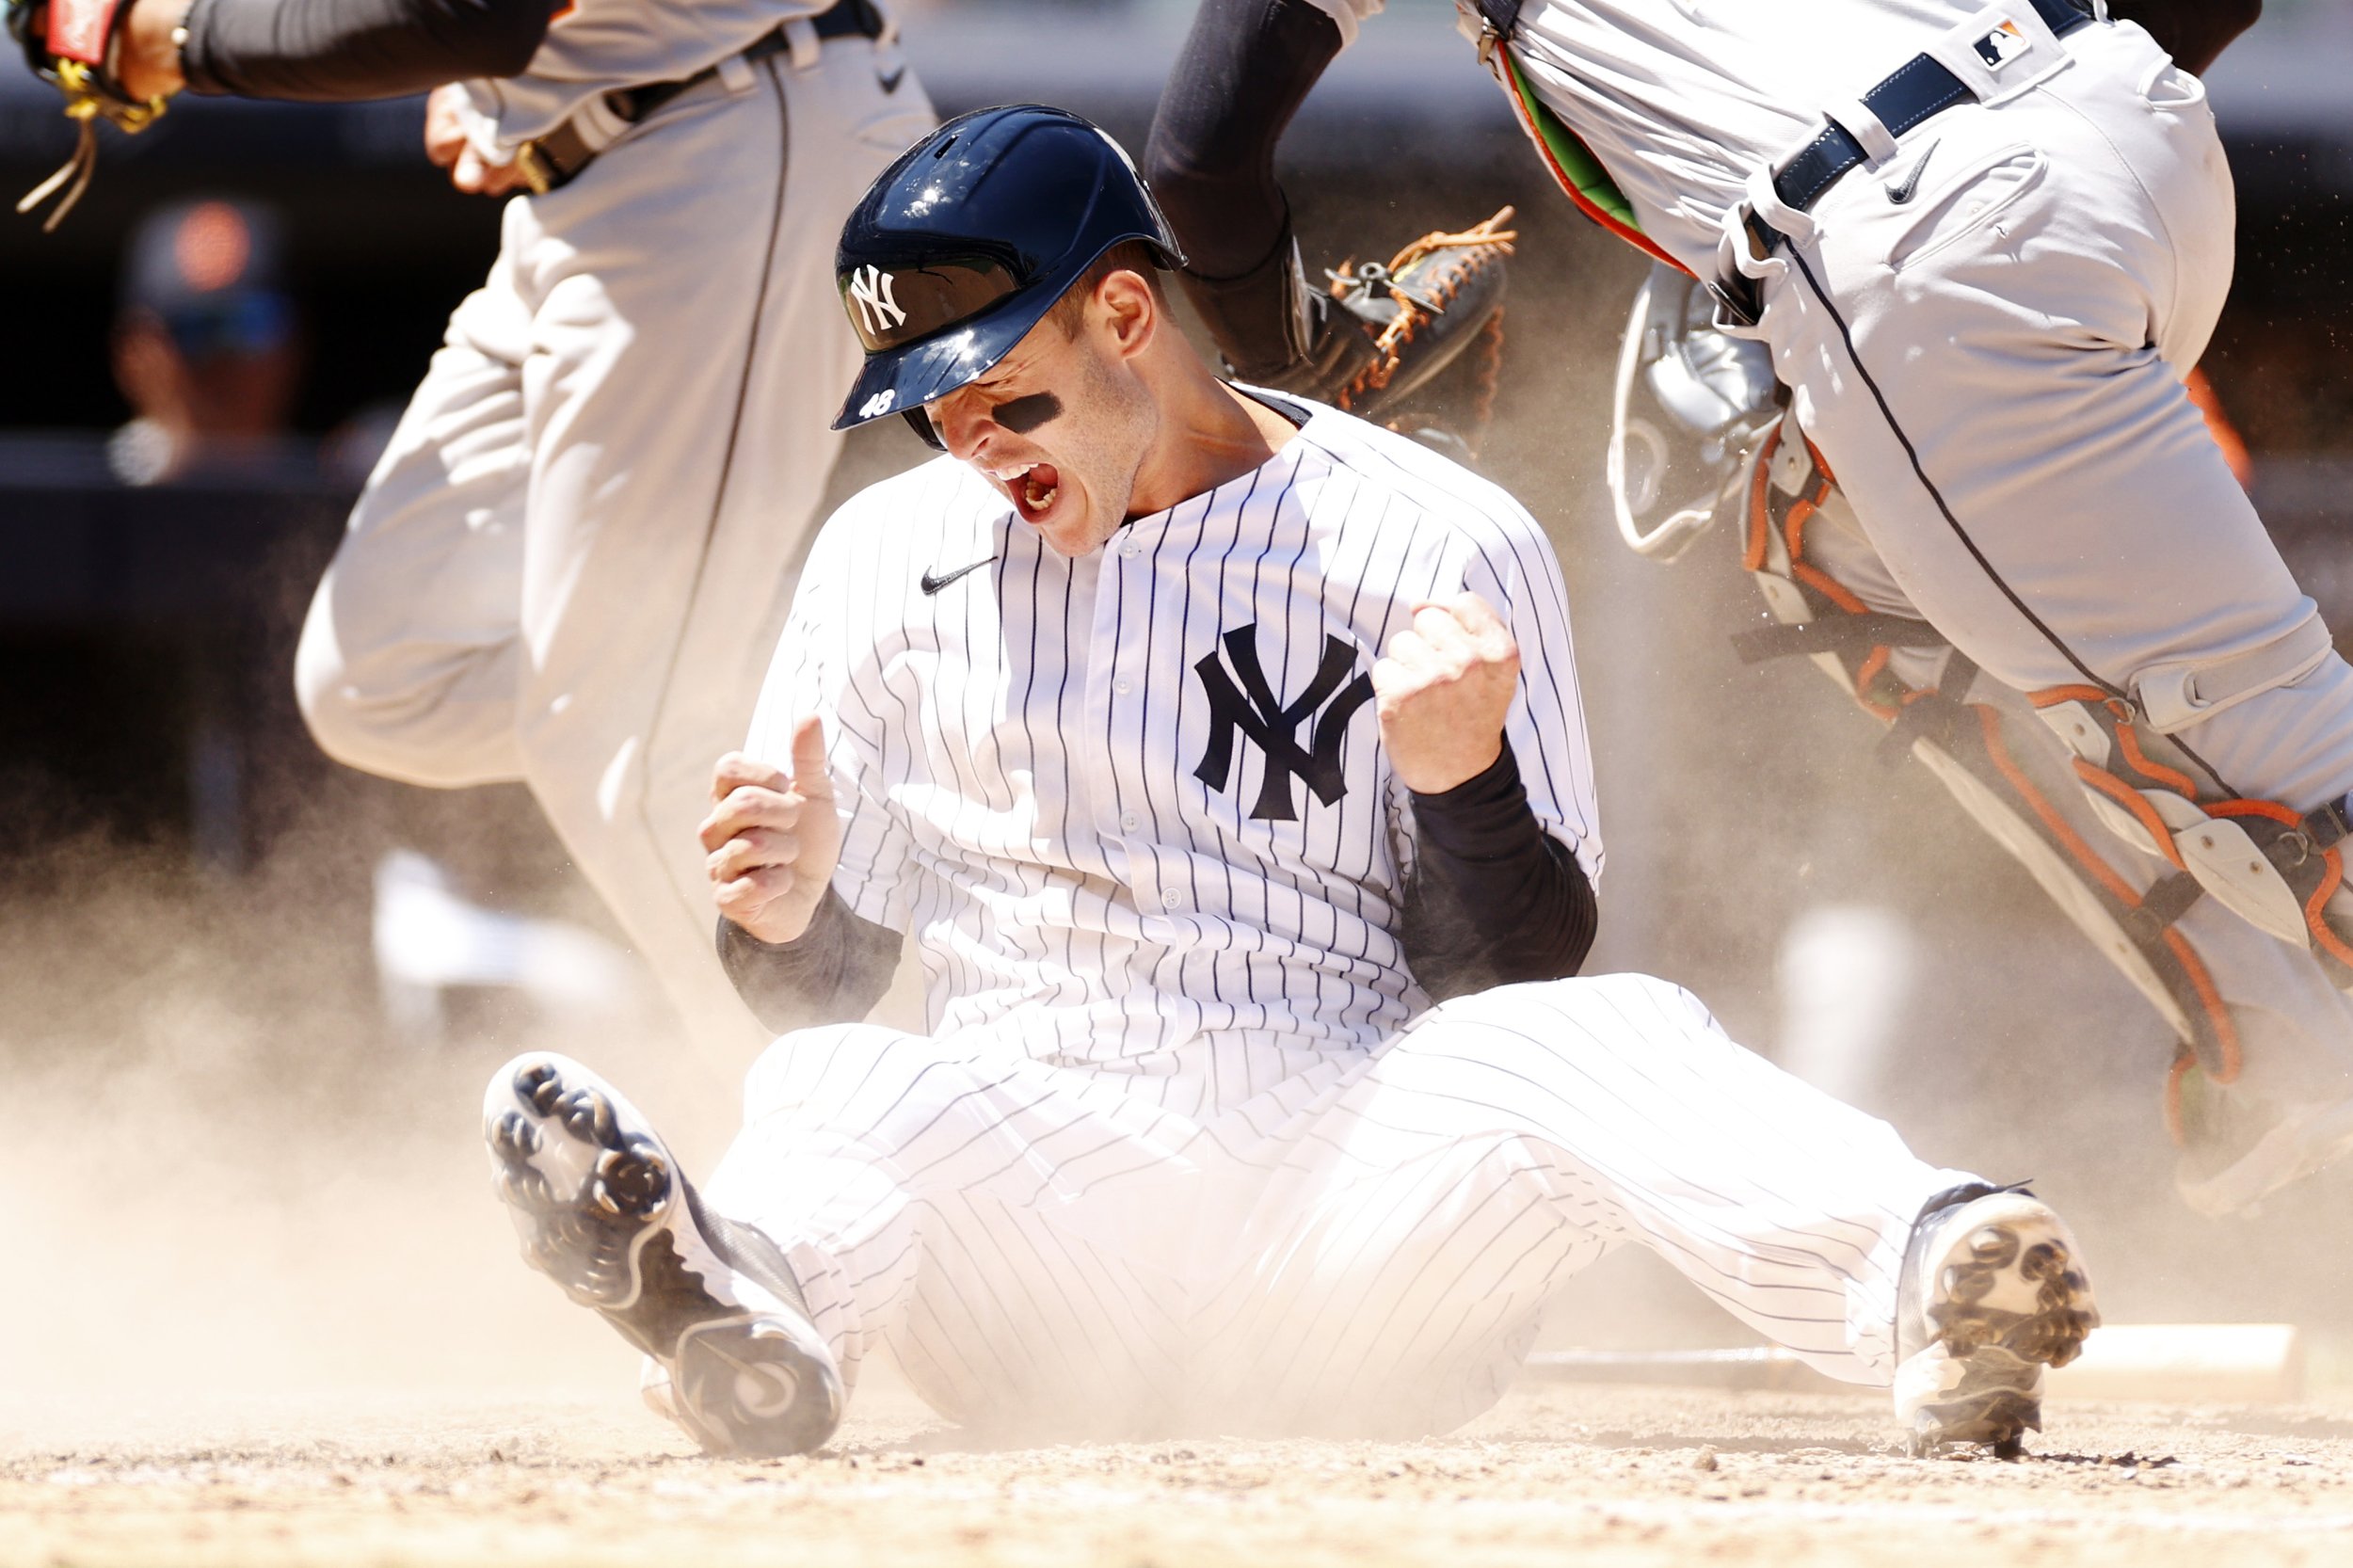  Anthony Rizzo #48 of the New York Yankees reacts after sliding safely into home to score on an error and tie the game during the eighth inning against the Detroit Tigers at Yankee Stadium on June 05, 2022 in the Bronx borough of New York City.  